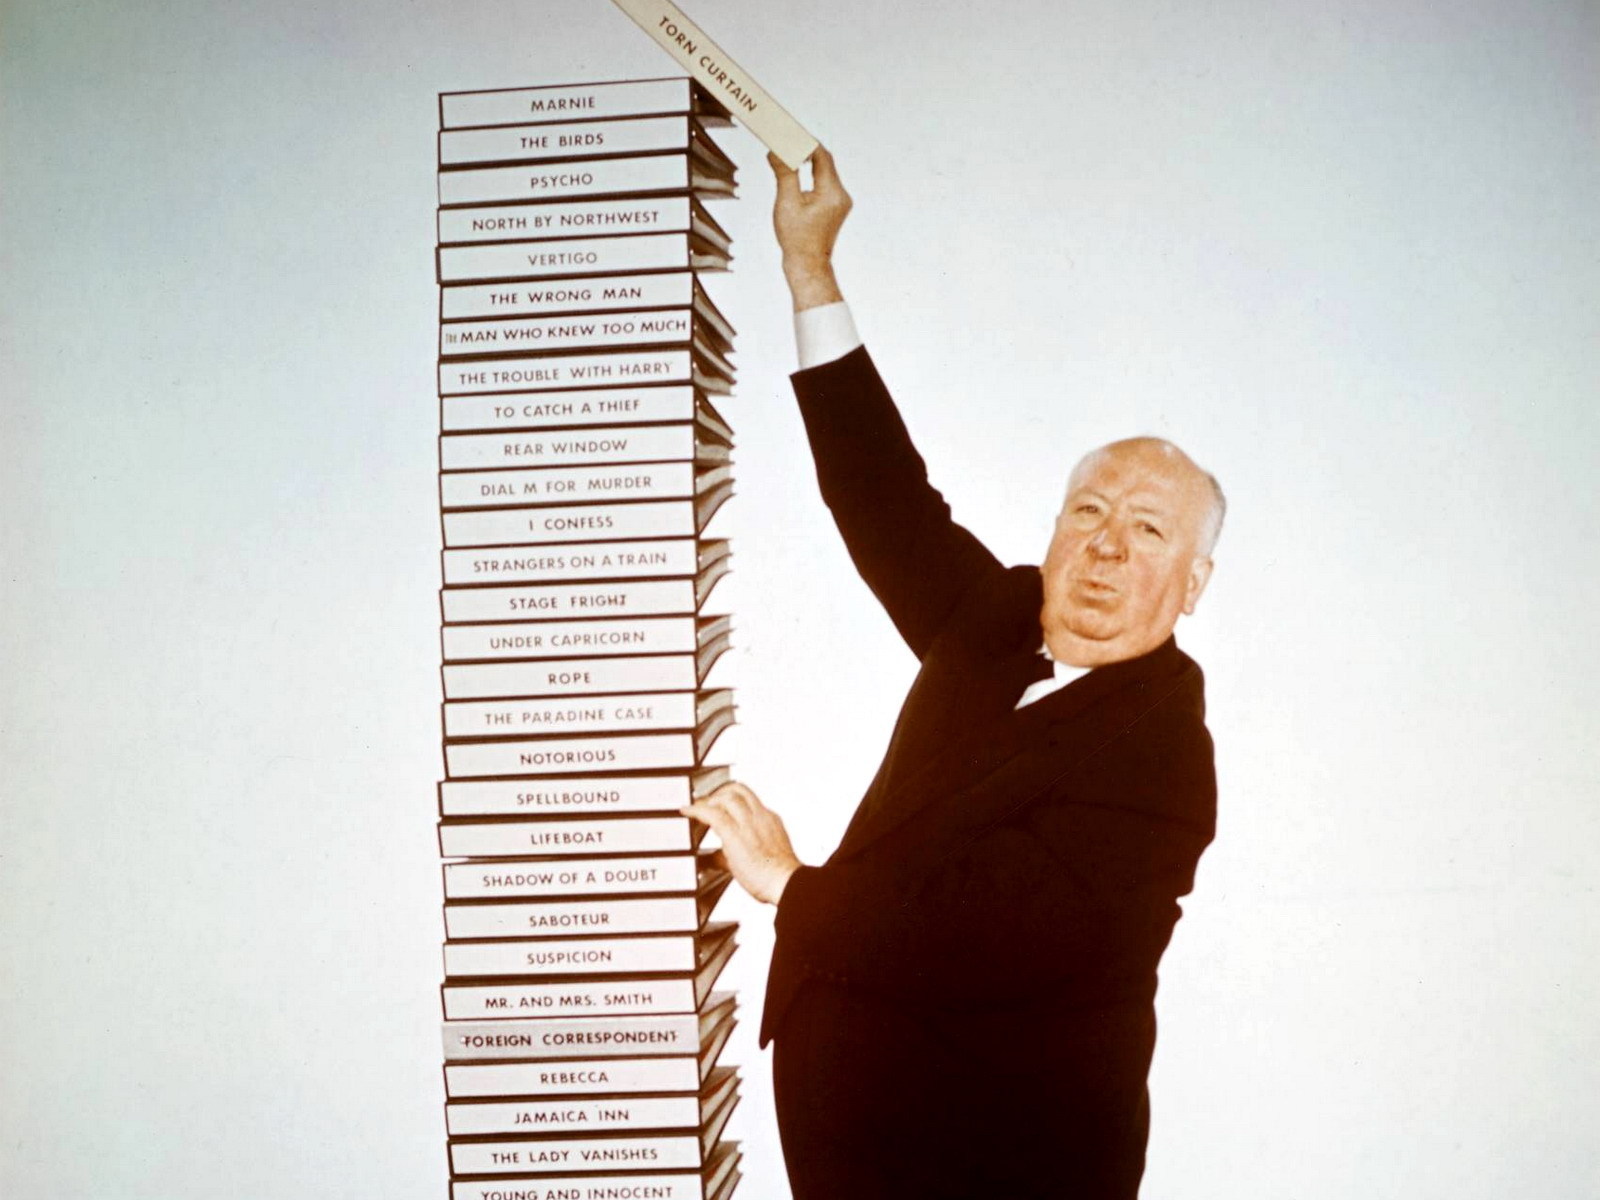 Alfred Hitchcock Image HD Wallpaper And Background